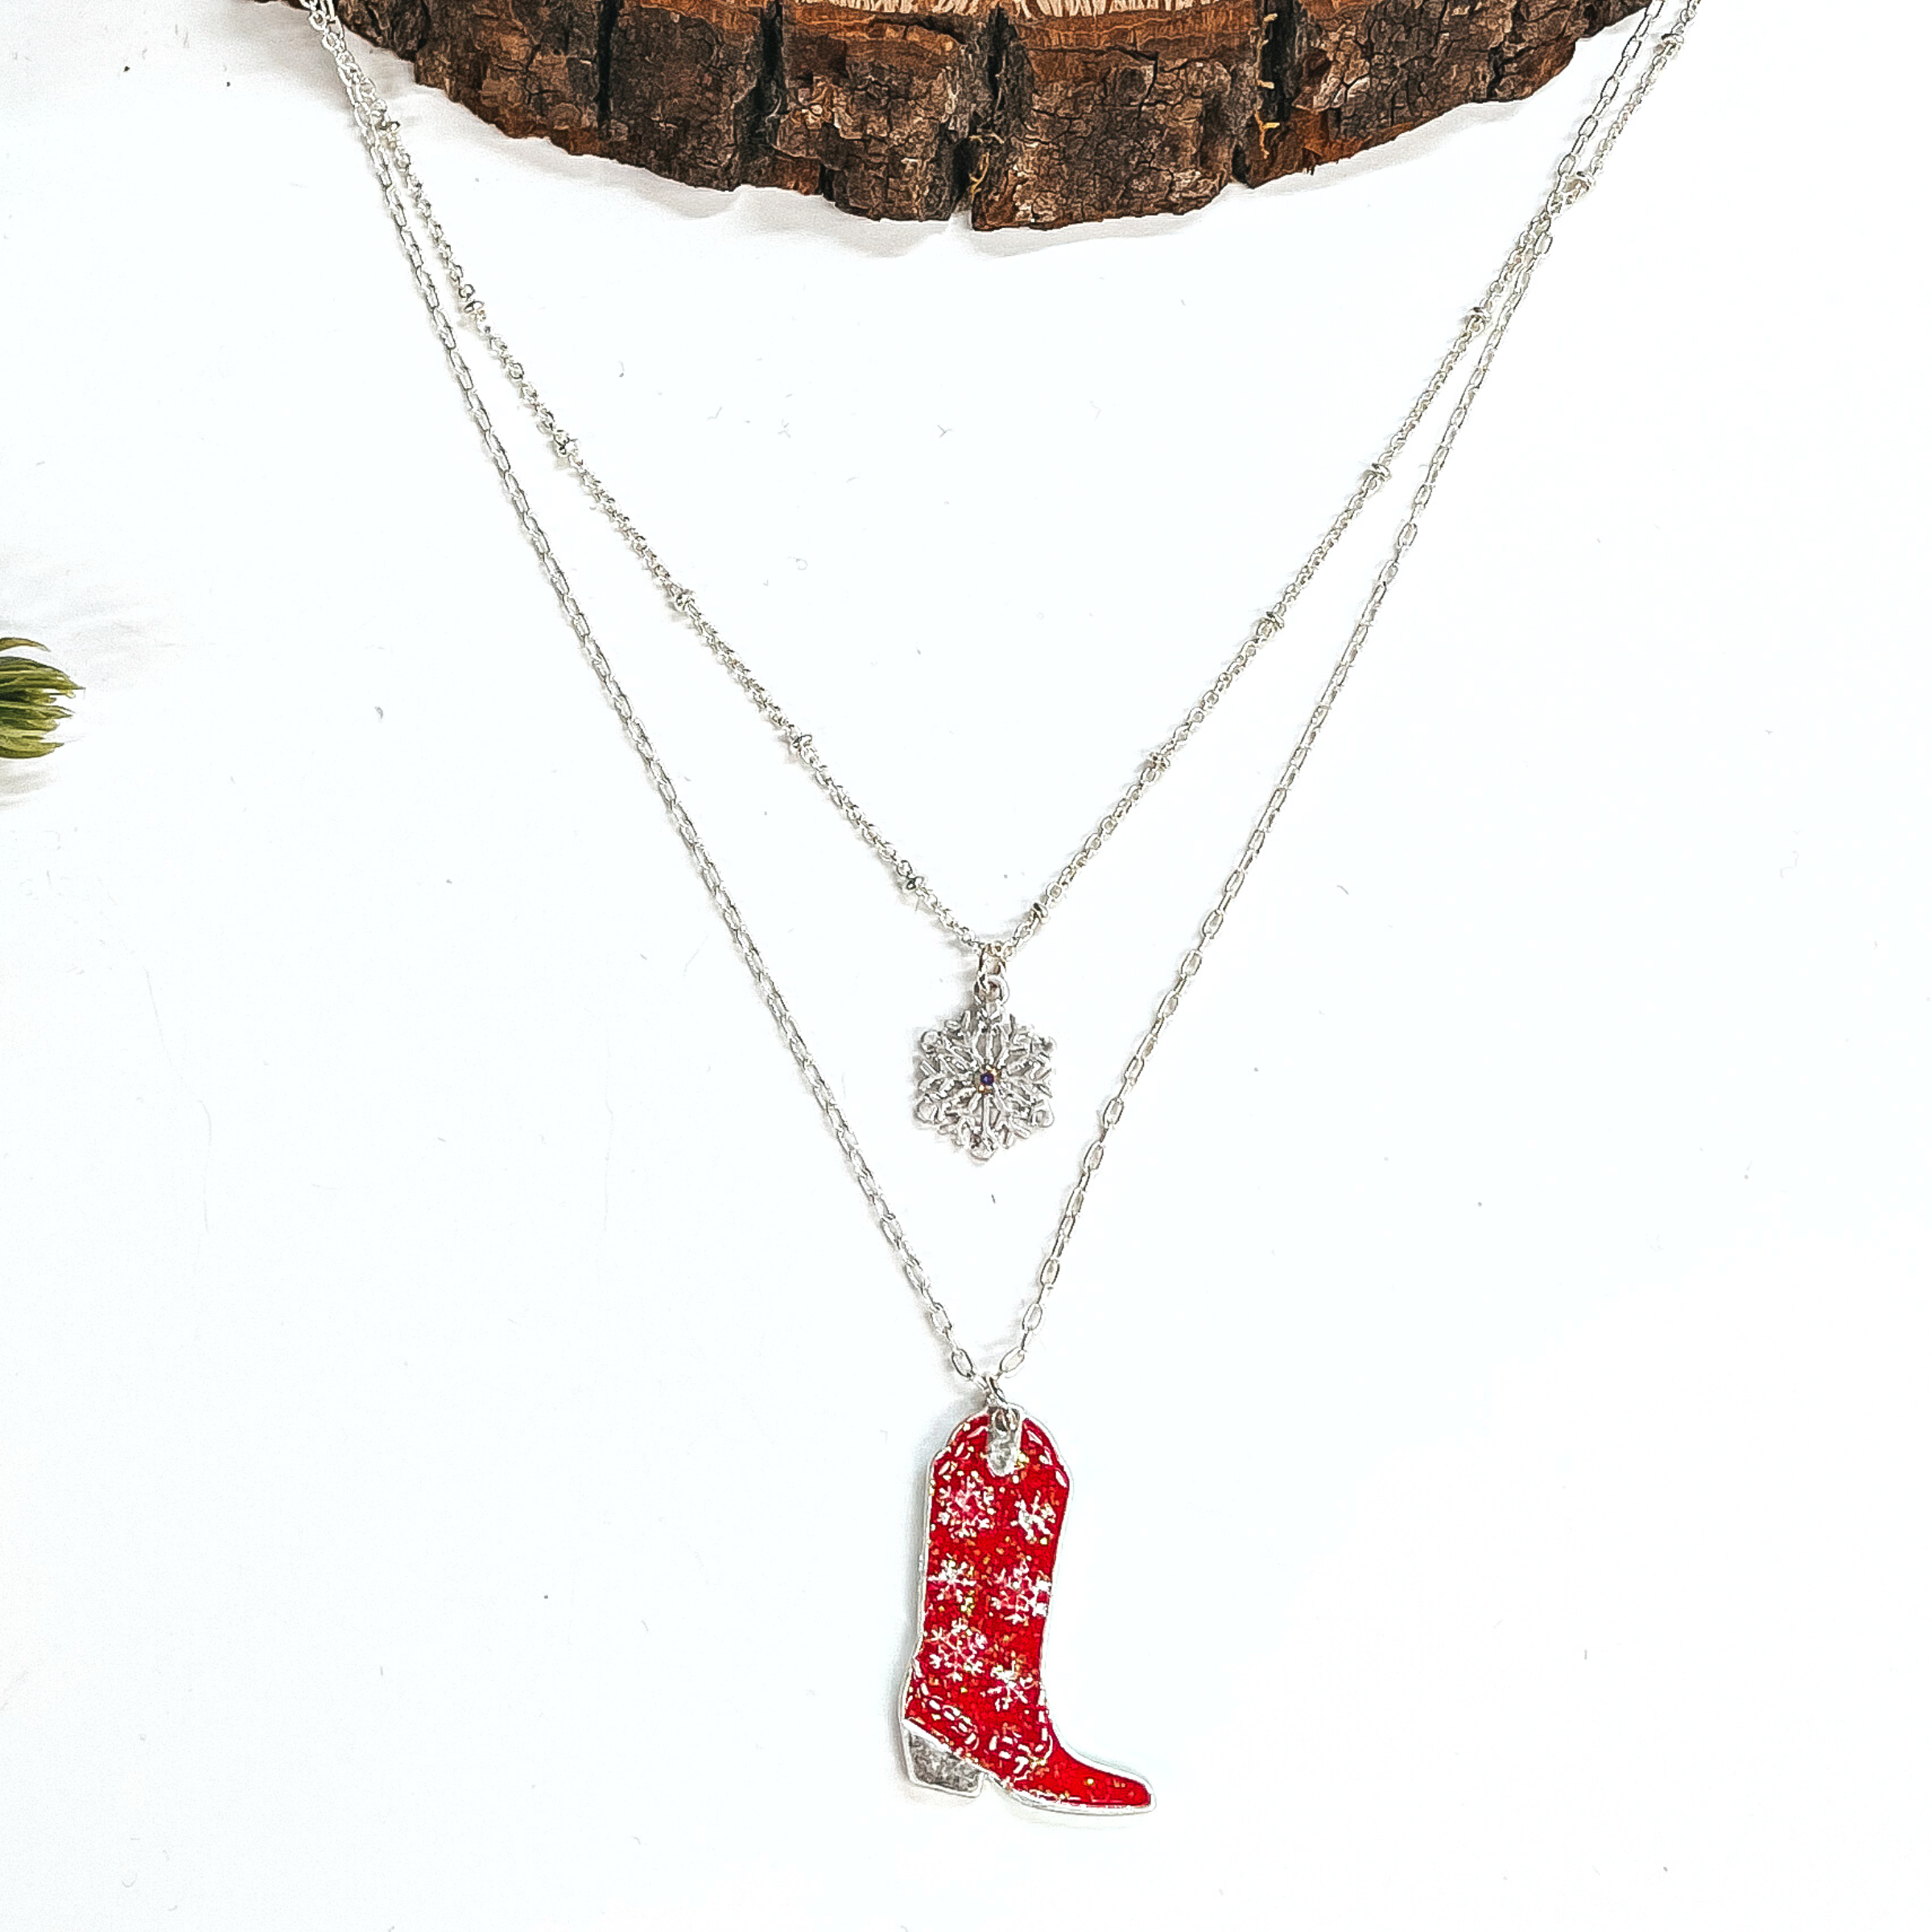 This is a double strand silver necklace with two hanging pendants.  The smaller strand has a silver snowflake charm and the longer strand has a  red glitter boot pendant. The boot pendant has a silver snowflake pattern  and the boot pendant is in a silver setting. This necklace is laying on a  white background and a slab of wood, with a pine cone tree in the side as decor.